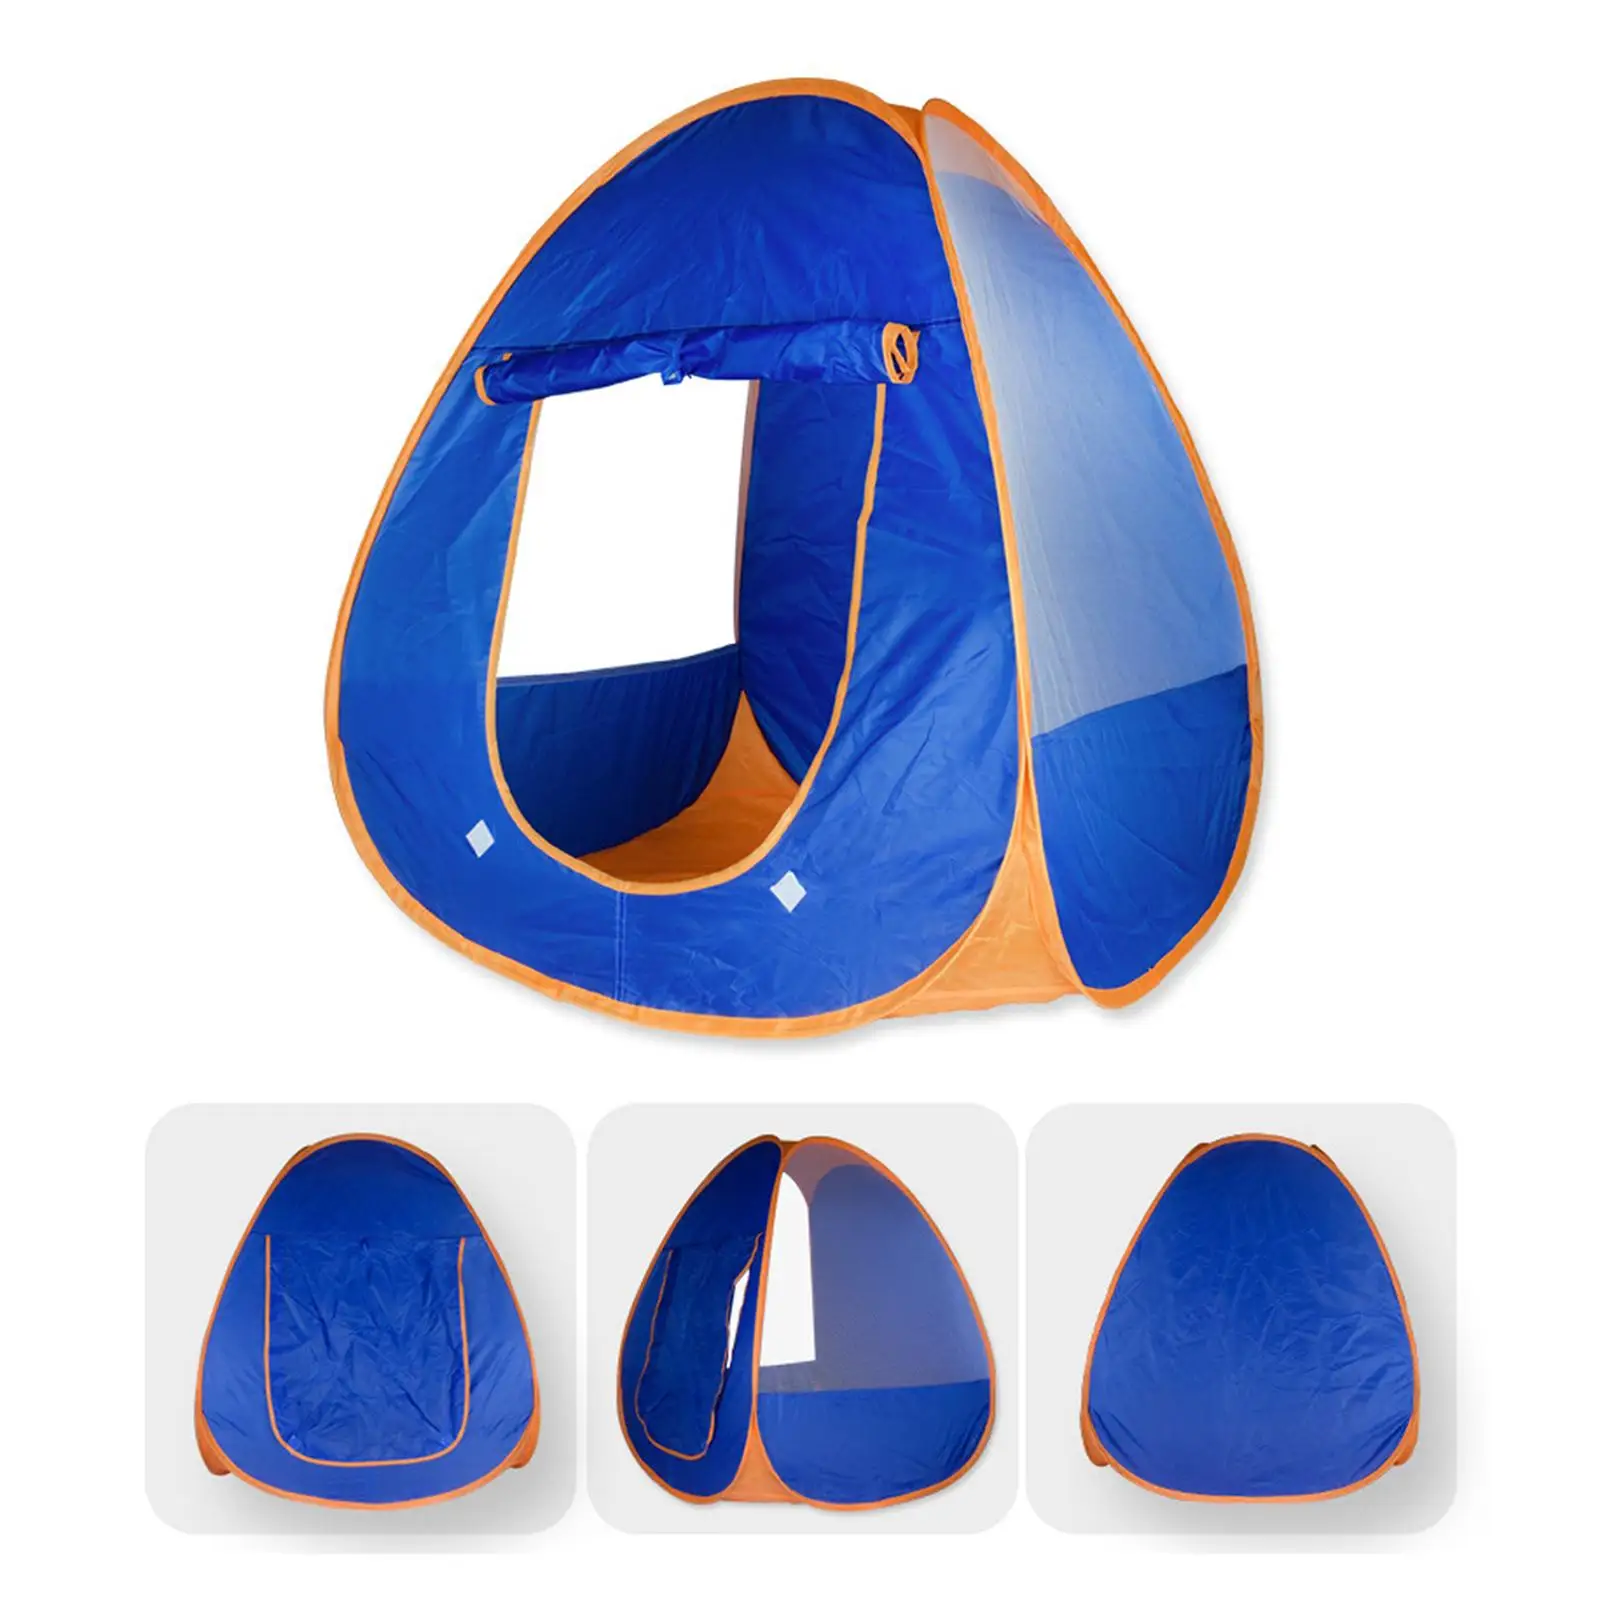 Children Play Tent Foldable Portable Role Play Toy for Beach Camping